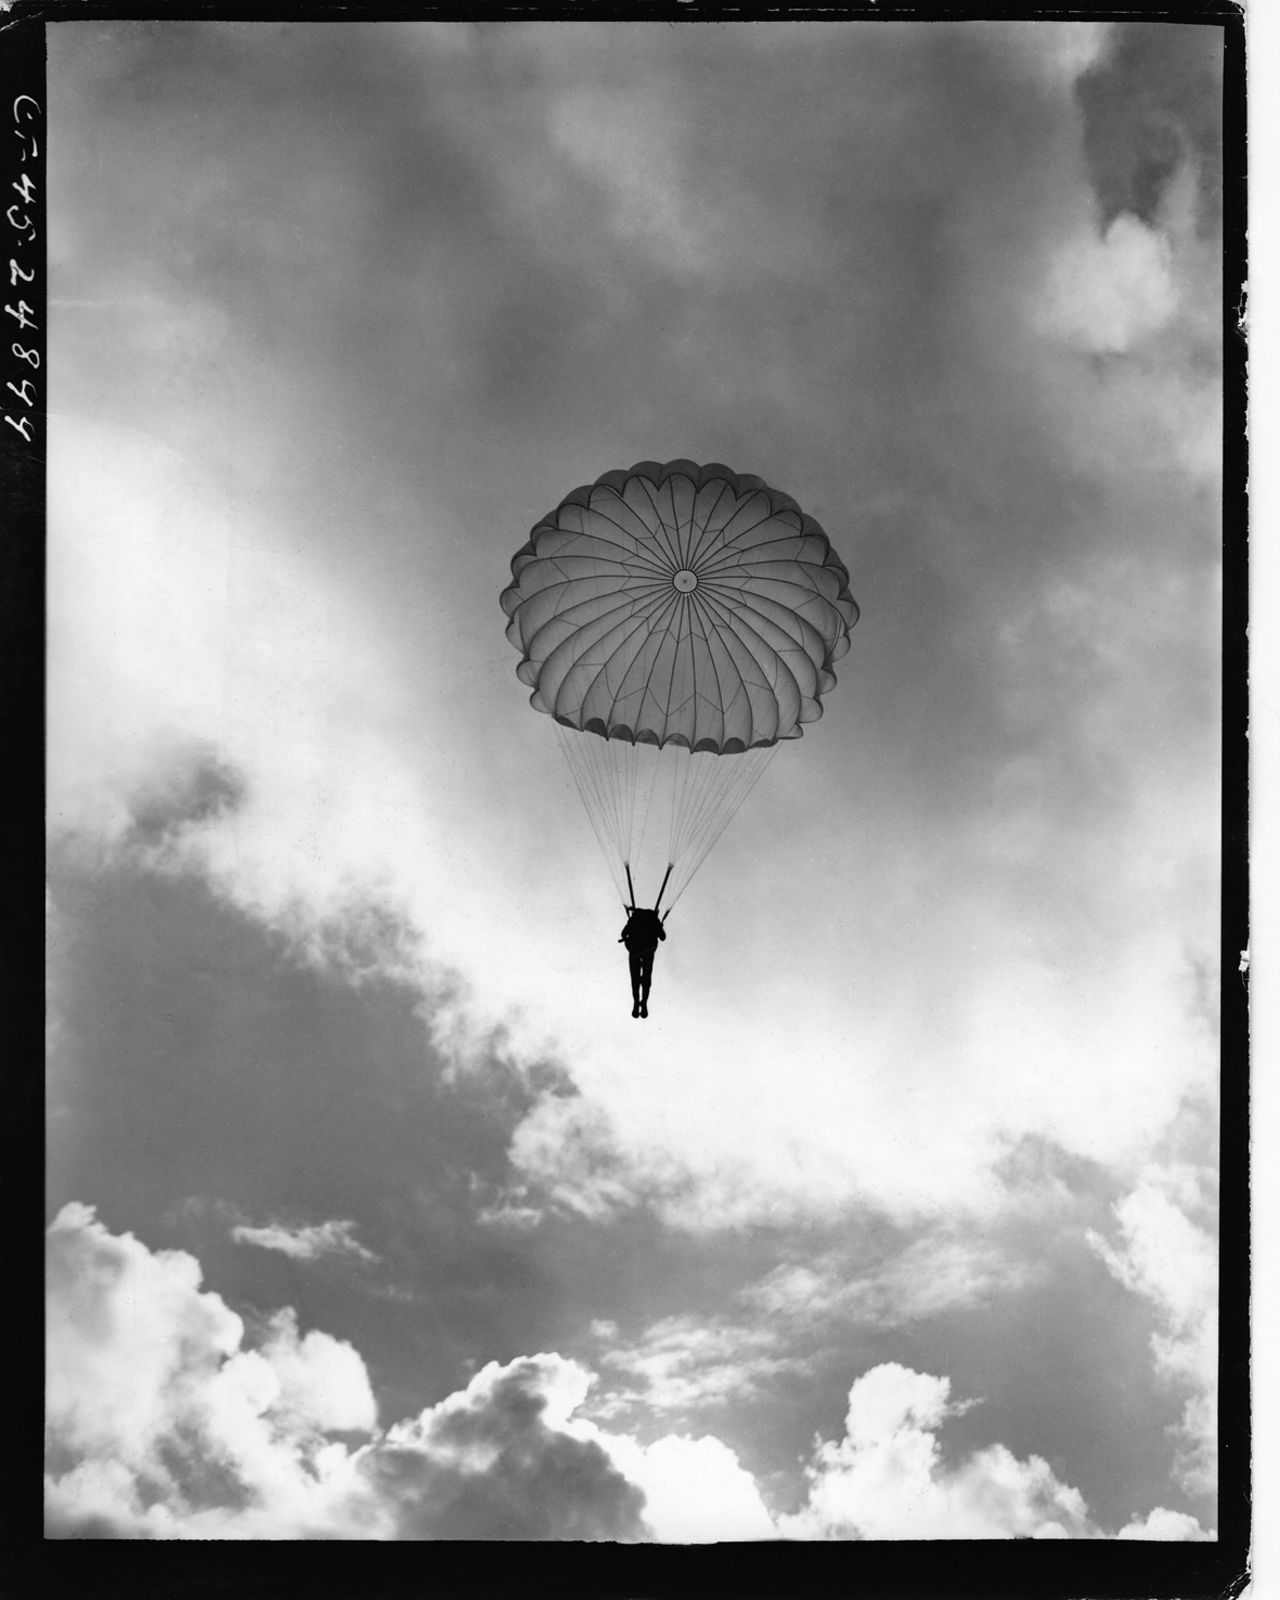 Zhang worked with Retired Army Col. John Easterbrook to bring the photo exhibition to the United States, where many Americans were surprised to learn of of the U.S. effort against Japan in China, Easterbrook says. Here, a Chinese commando being trained as a paratrooper by American officers makes his first jump in Kunming, southwest China.